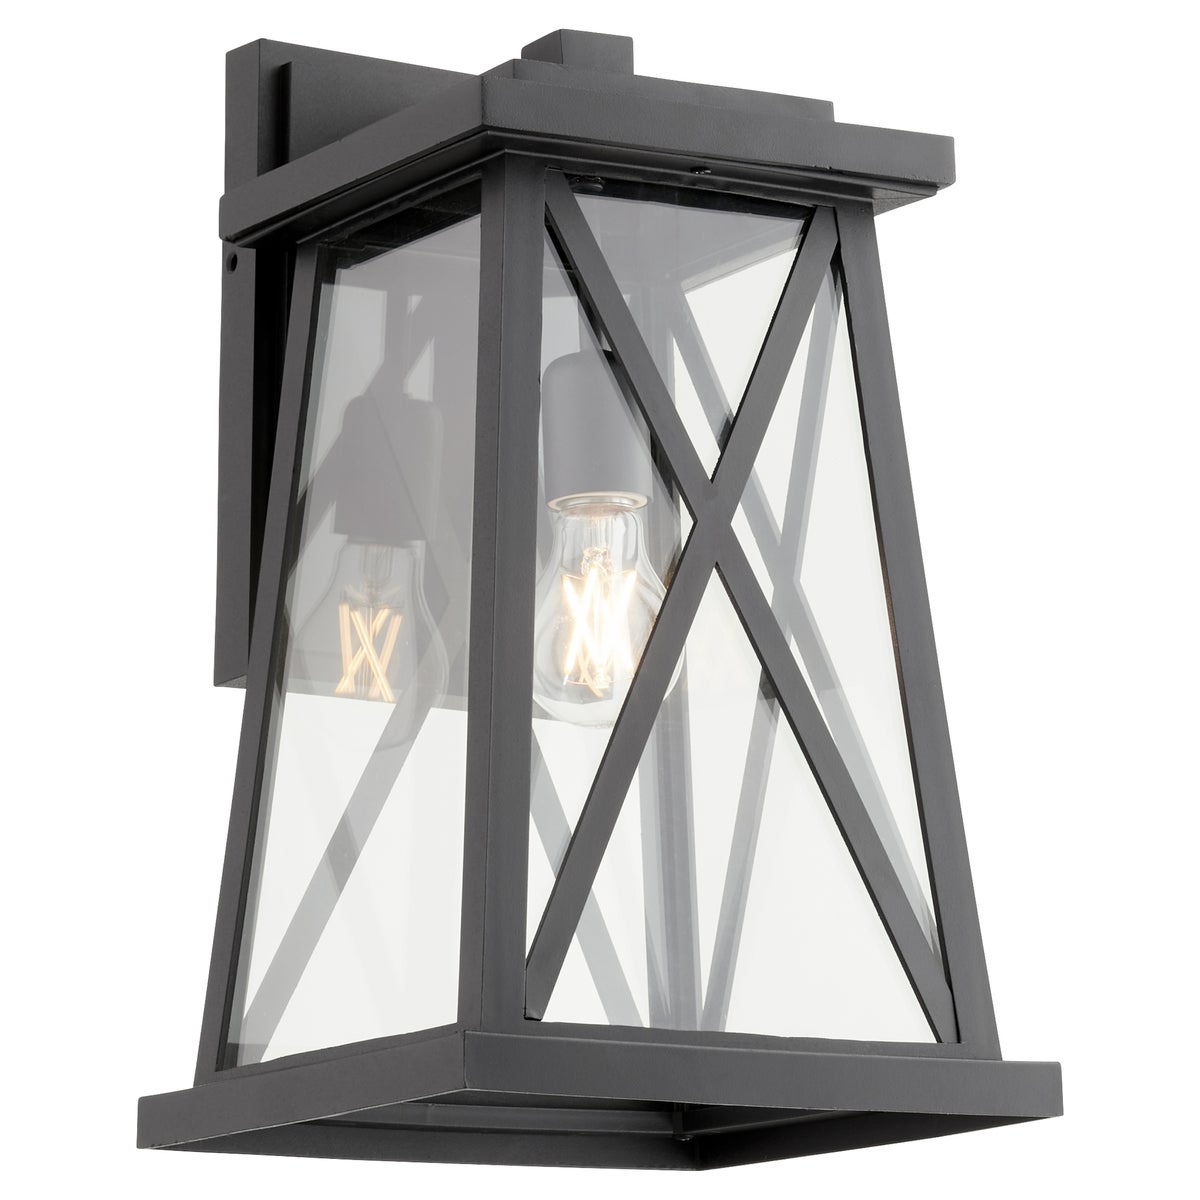 Black Outdoor Wall Light with glass fixture and X-brace design, emitting warm glow. 100W, UL Listed, Wet Location. Dimensions: 9.25"W x 16.25"H x 9.75"E.